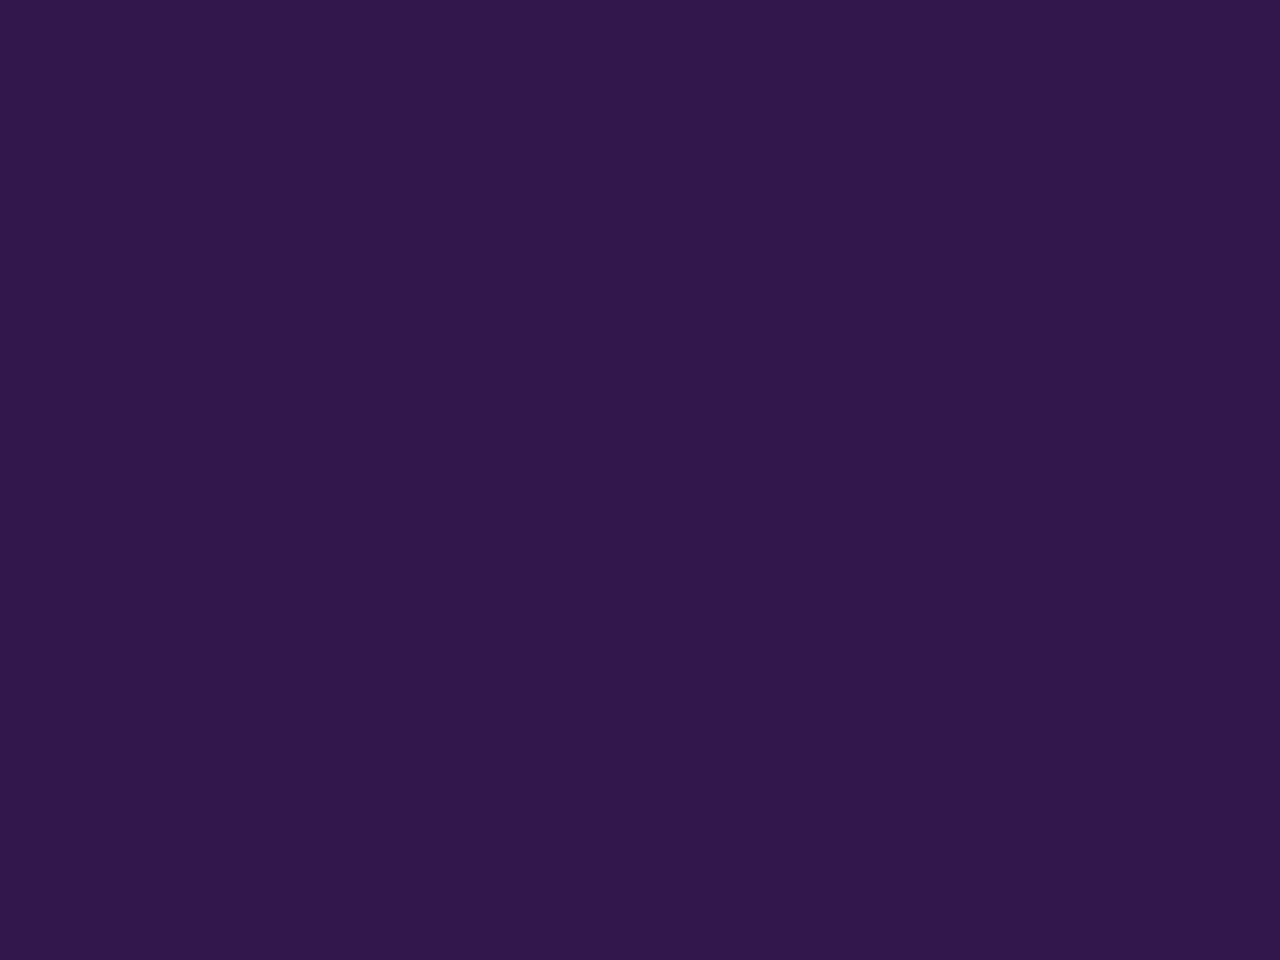 1280x960 Russian Violet Solid Color Background